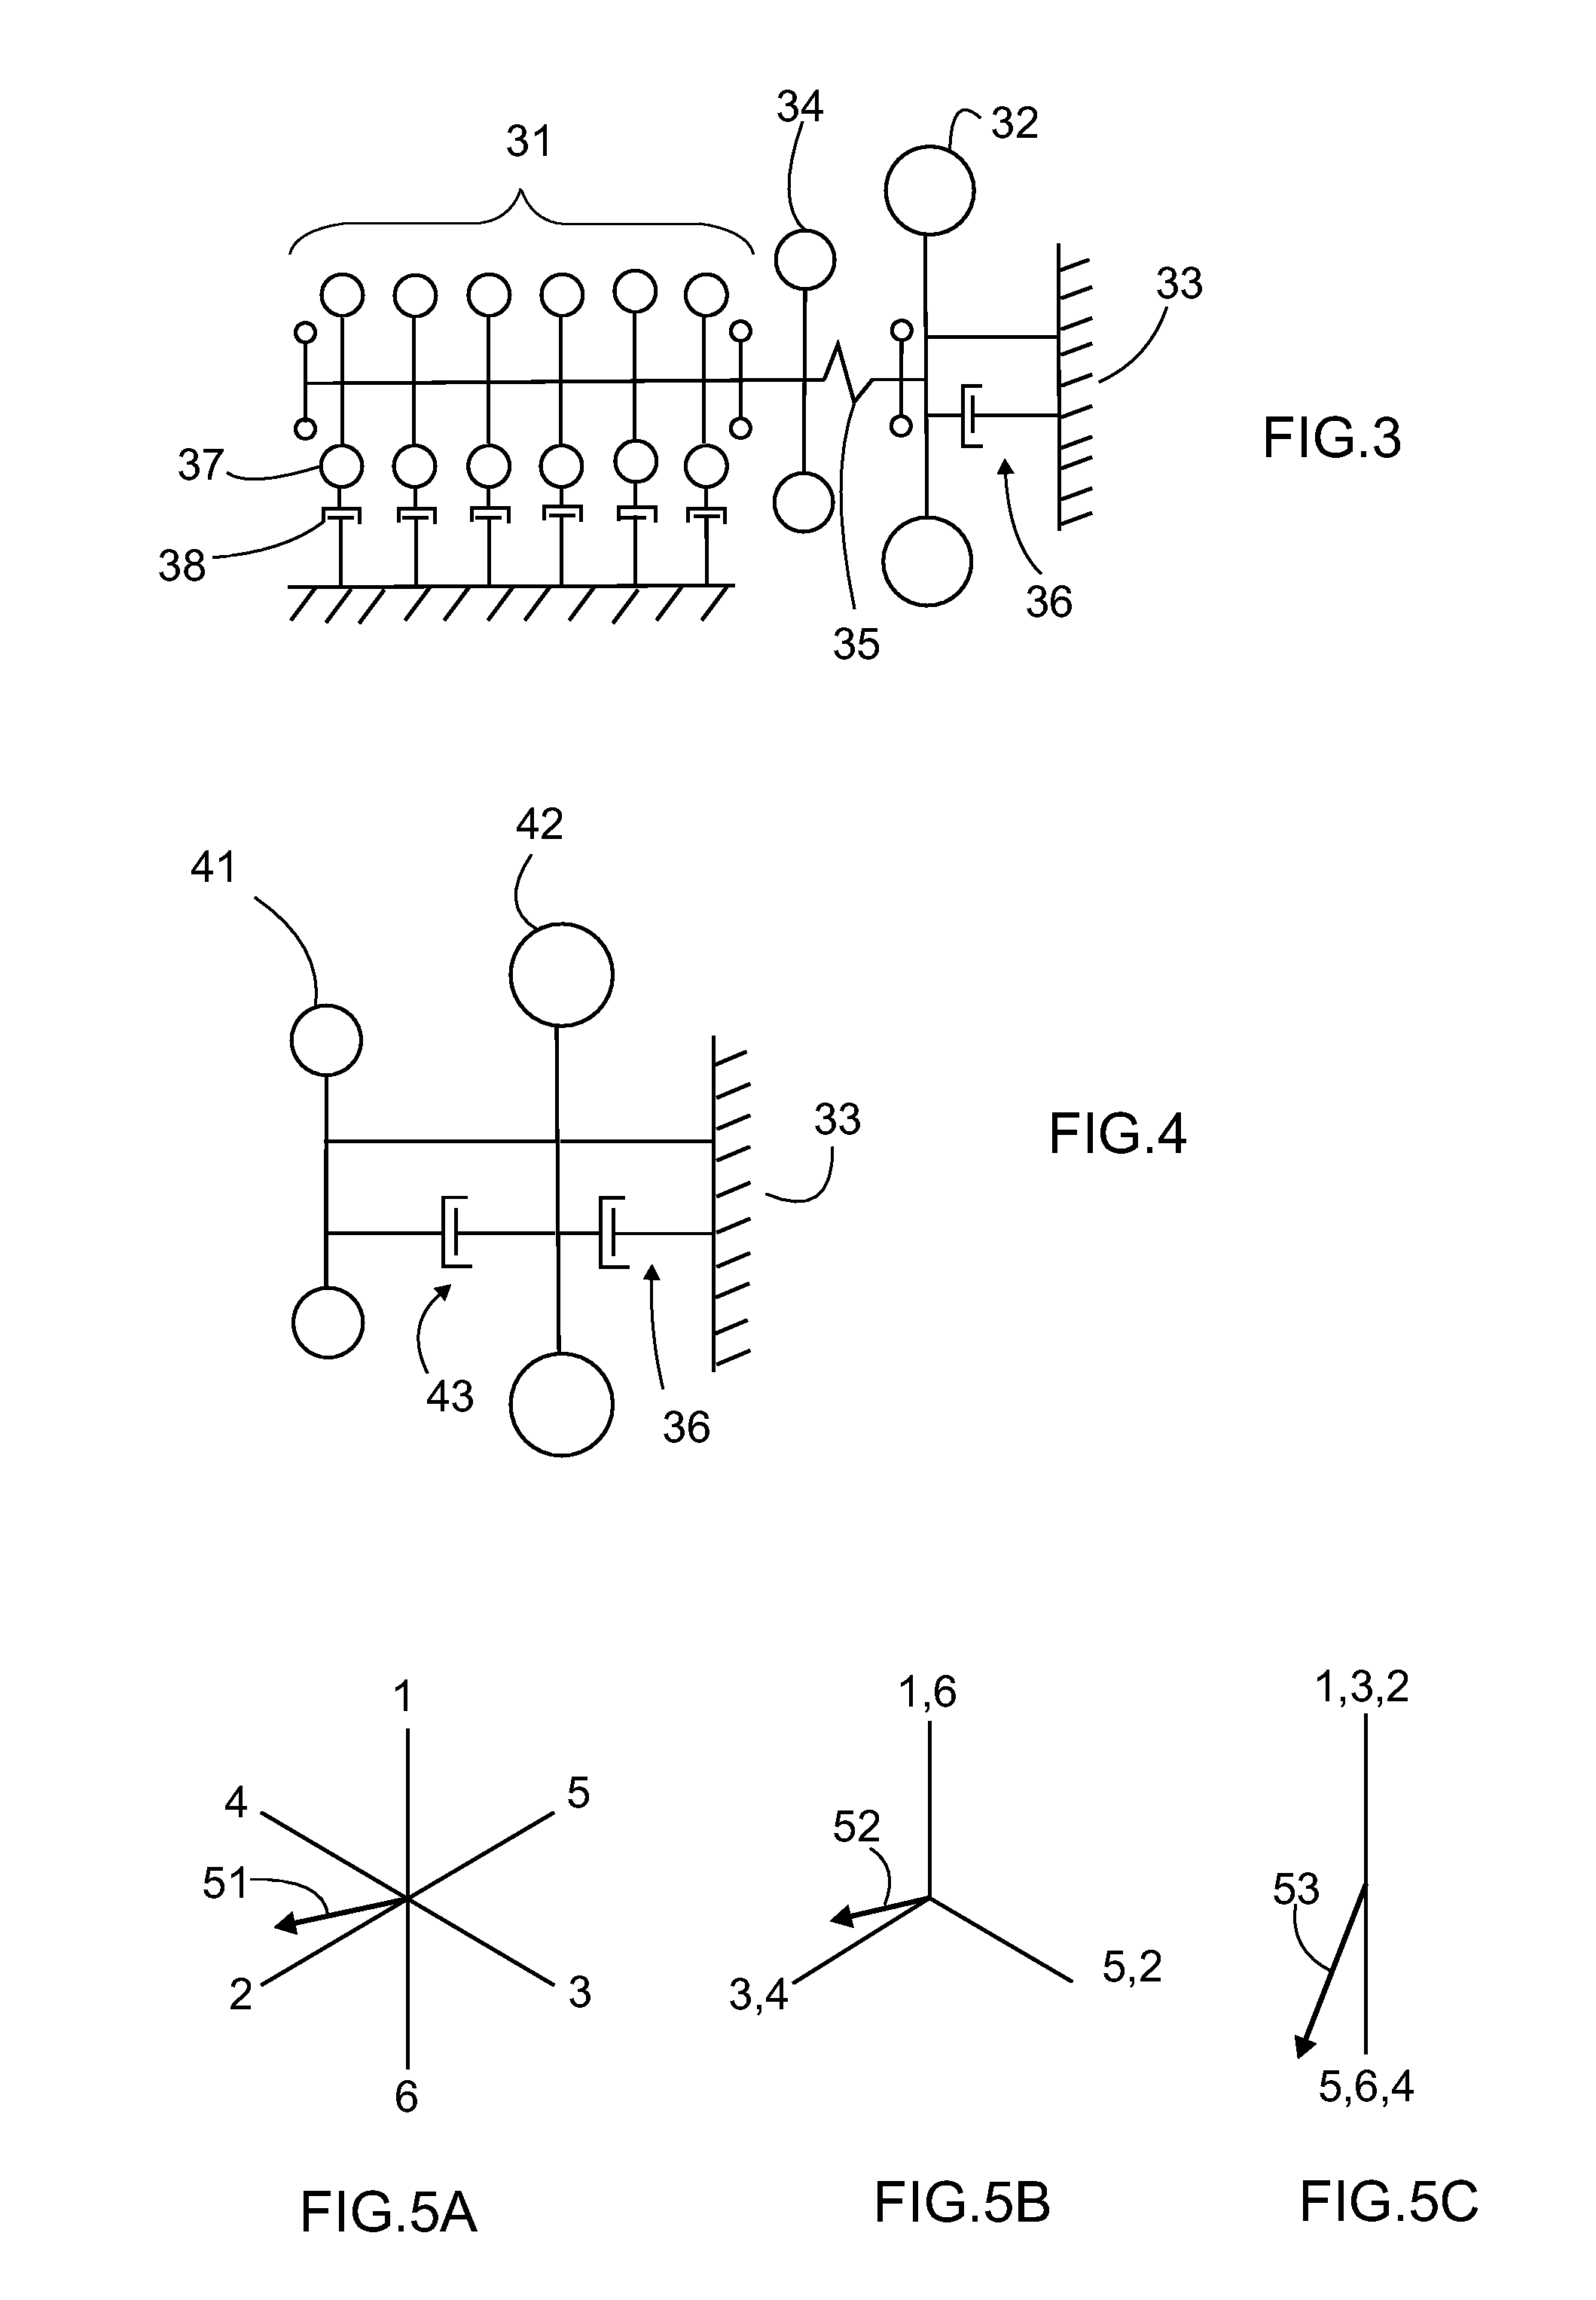 Apparatus for Identifying a Non-Uniform Share of Cylinder Power in an Internal Combustion Piston Engine System